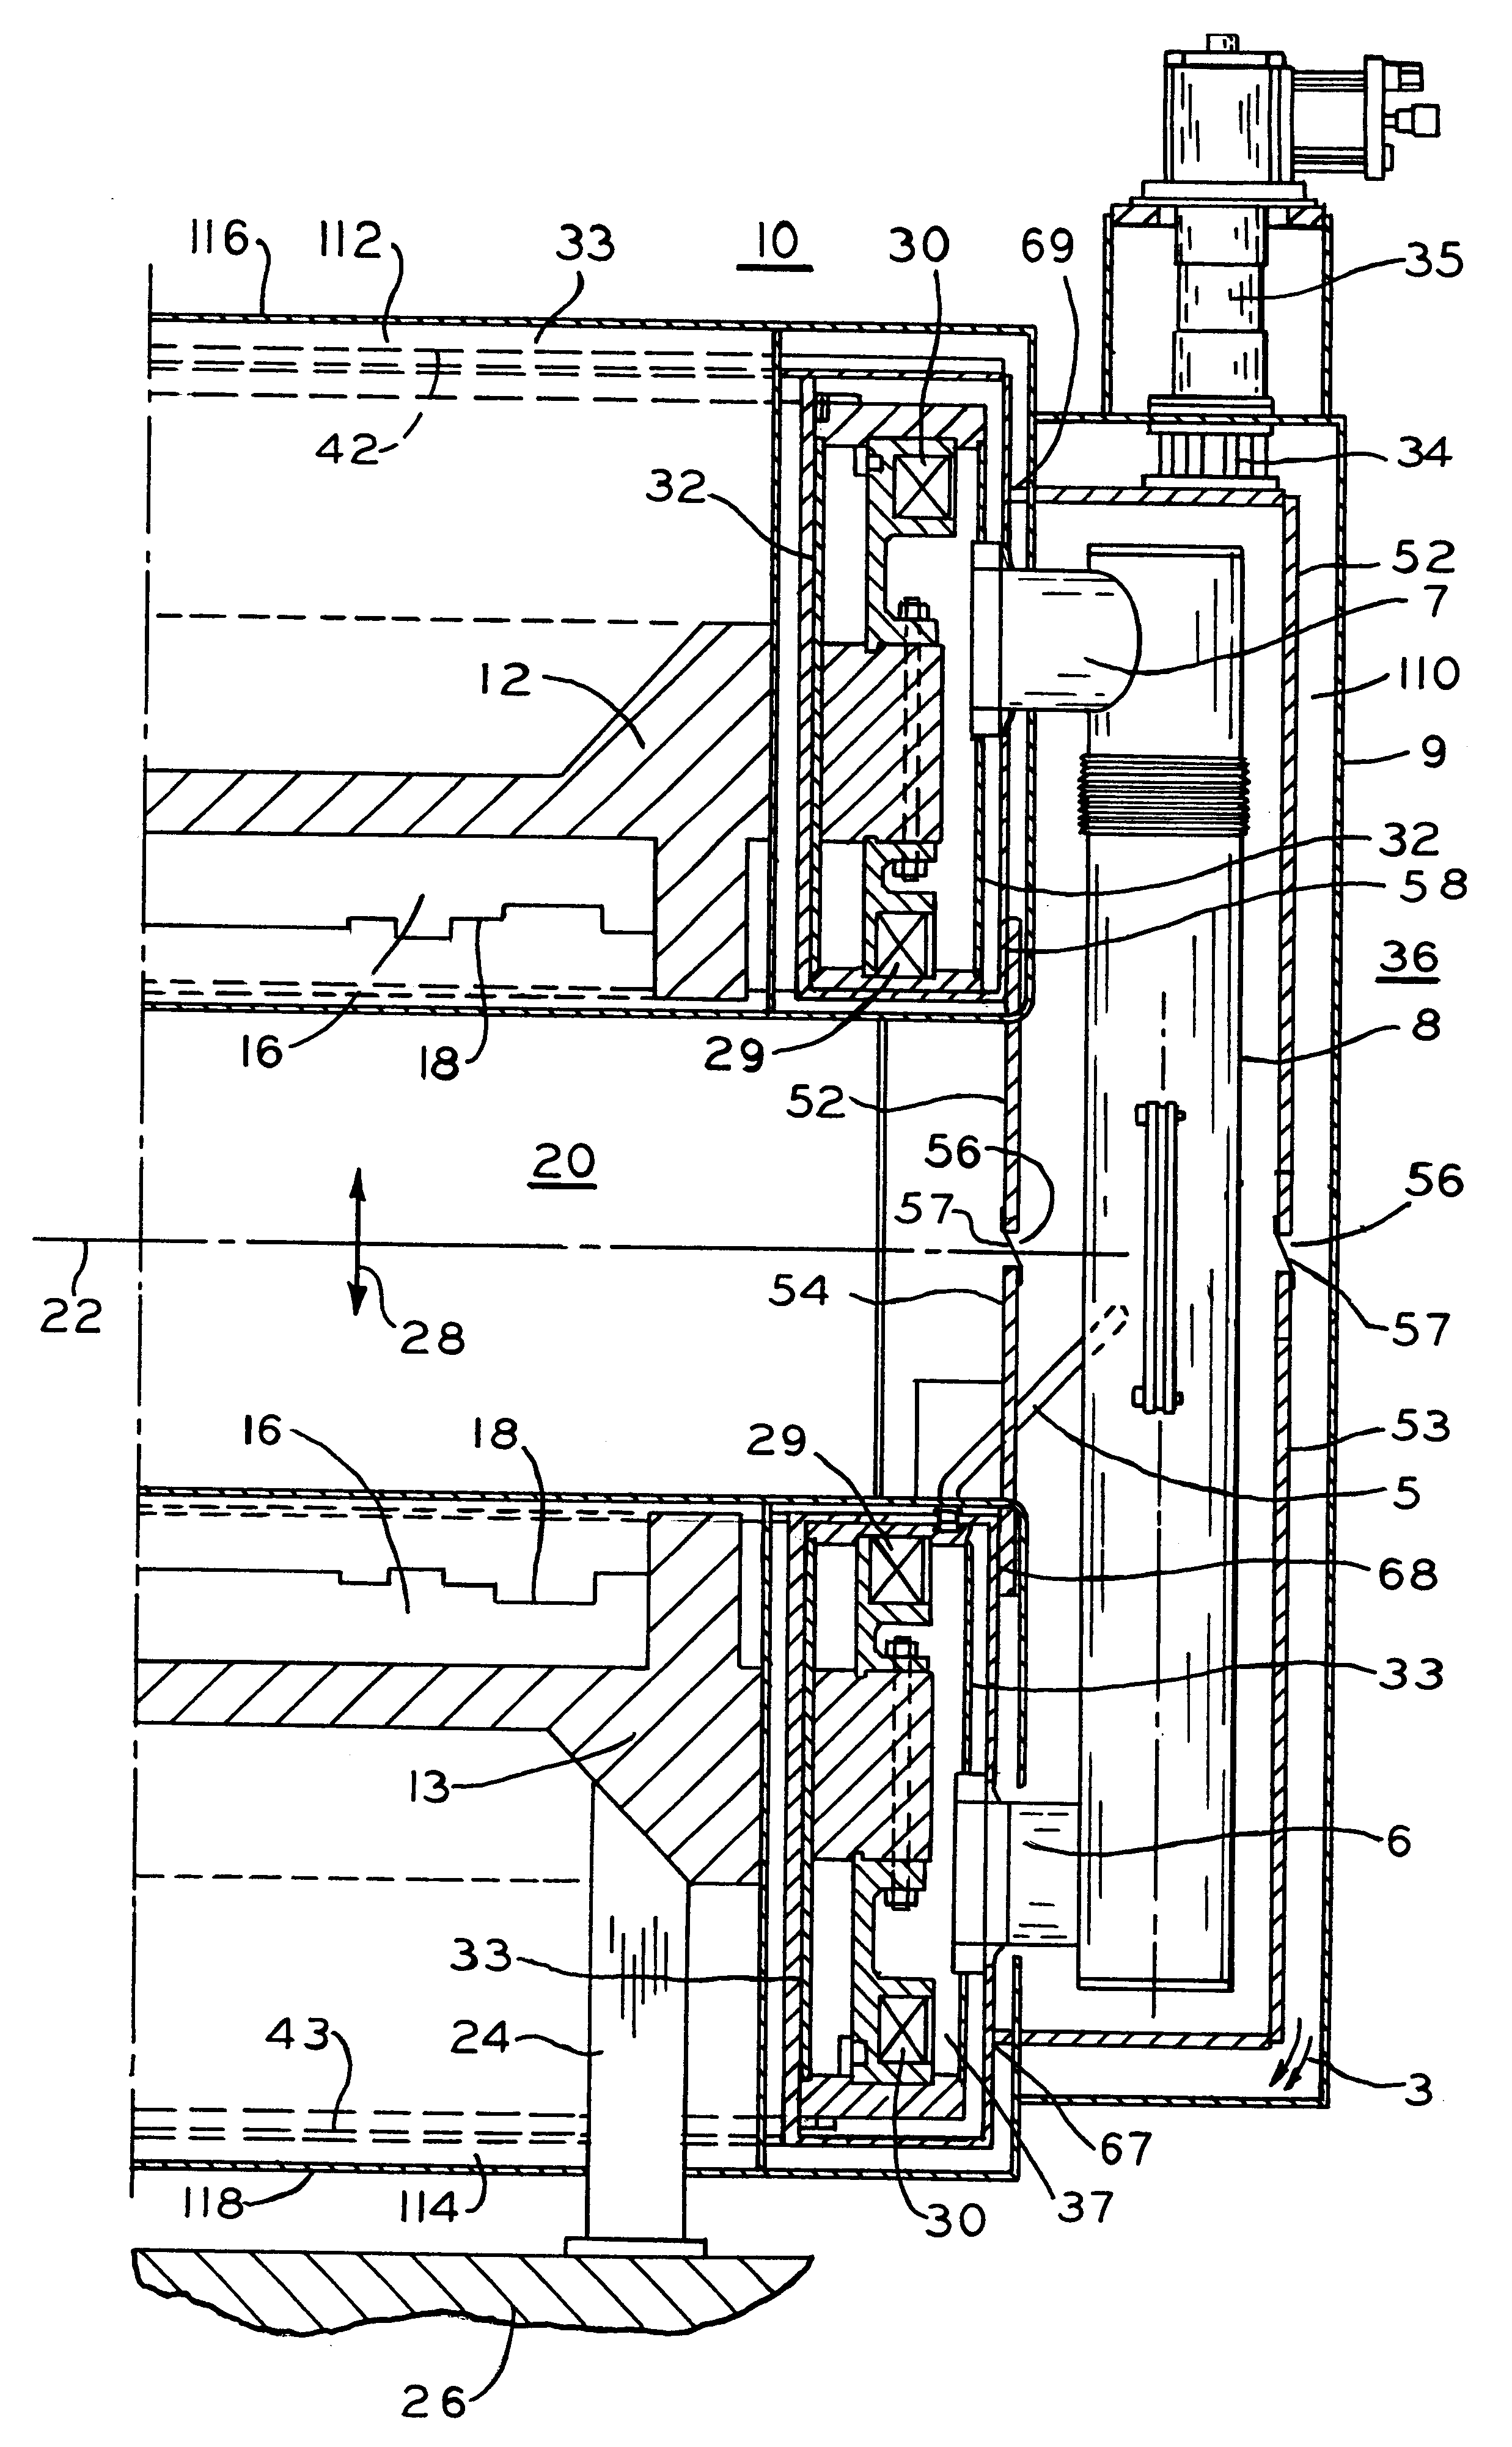 Superconducting magnet split cryostat interconnect assembly